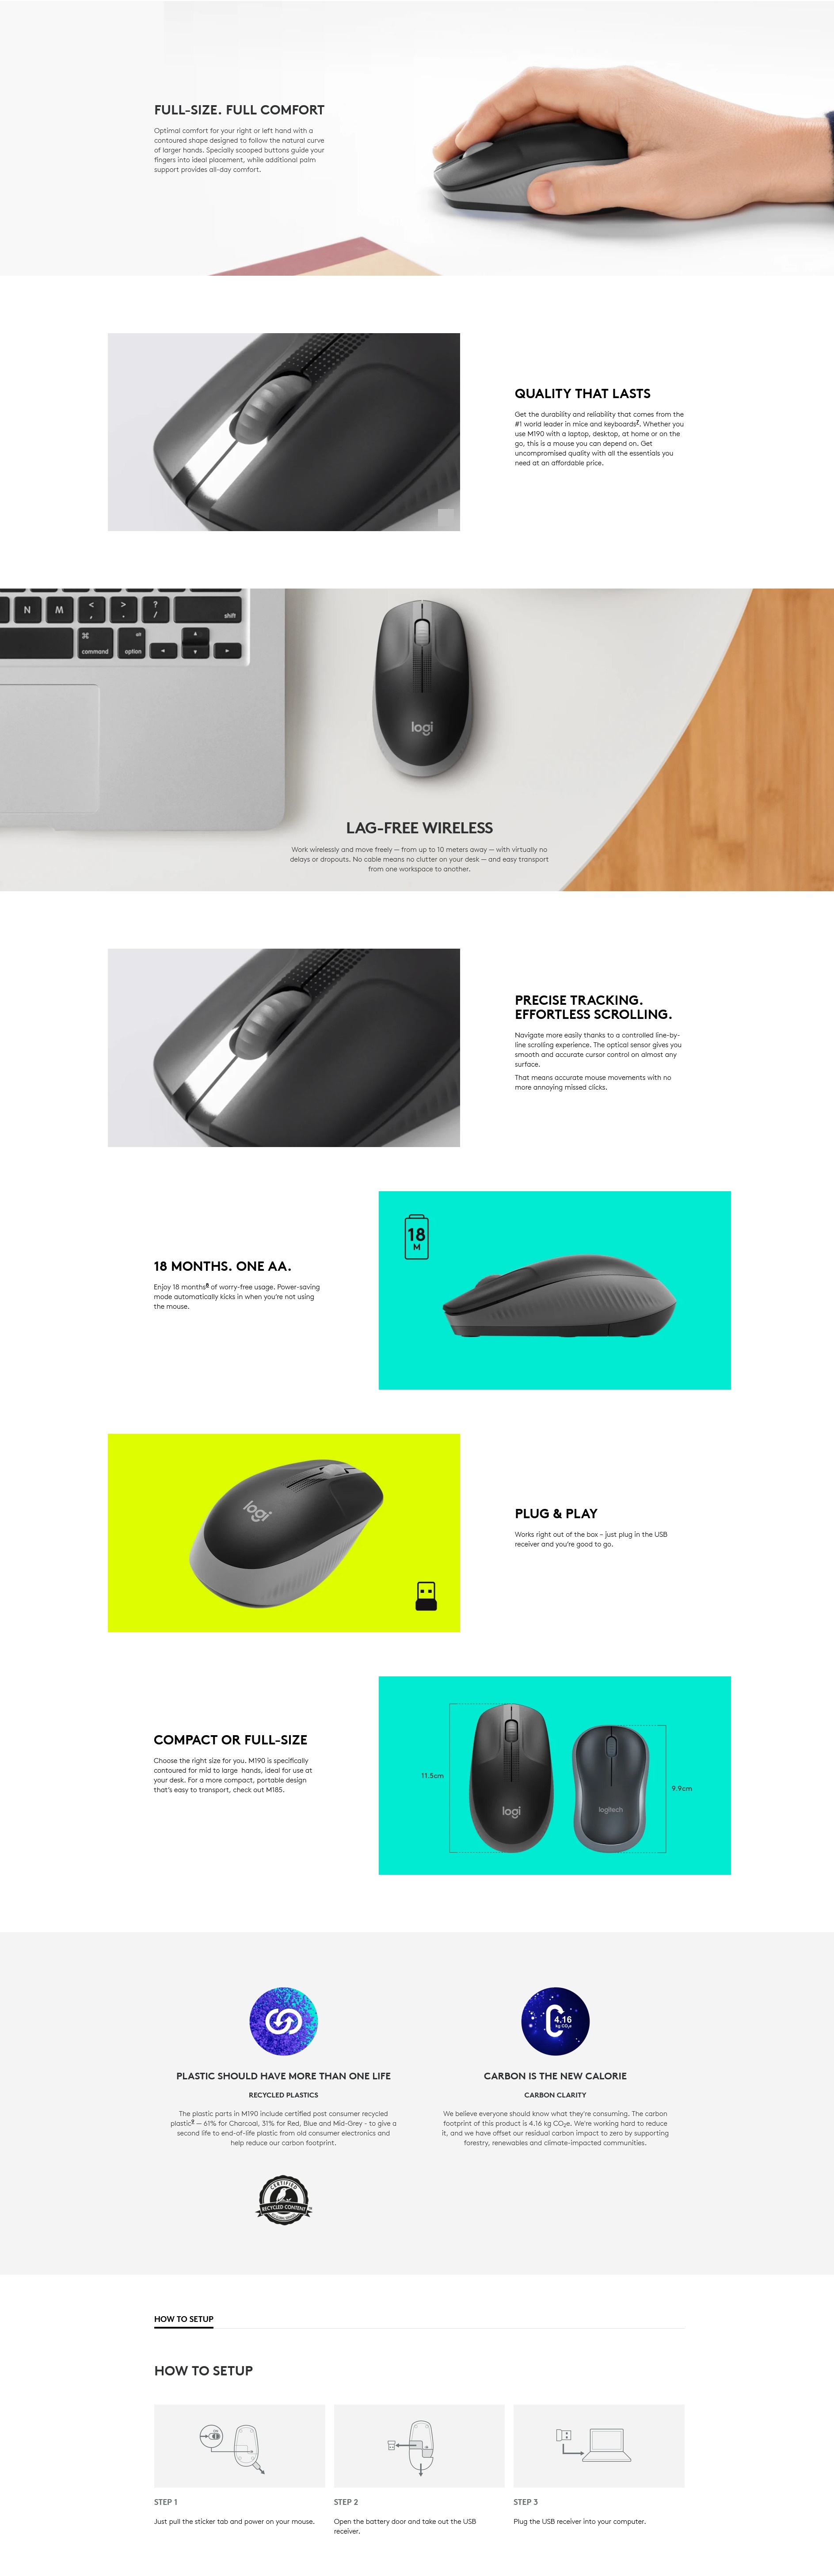 A large marketing image providing additional information about the product Logitech M190 Wireless Mouse - Charcoal - Additional alt info not provided